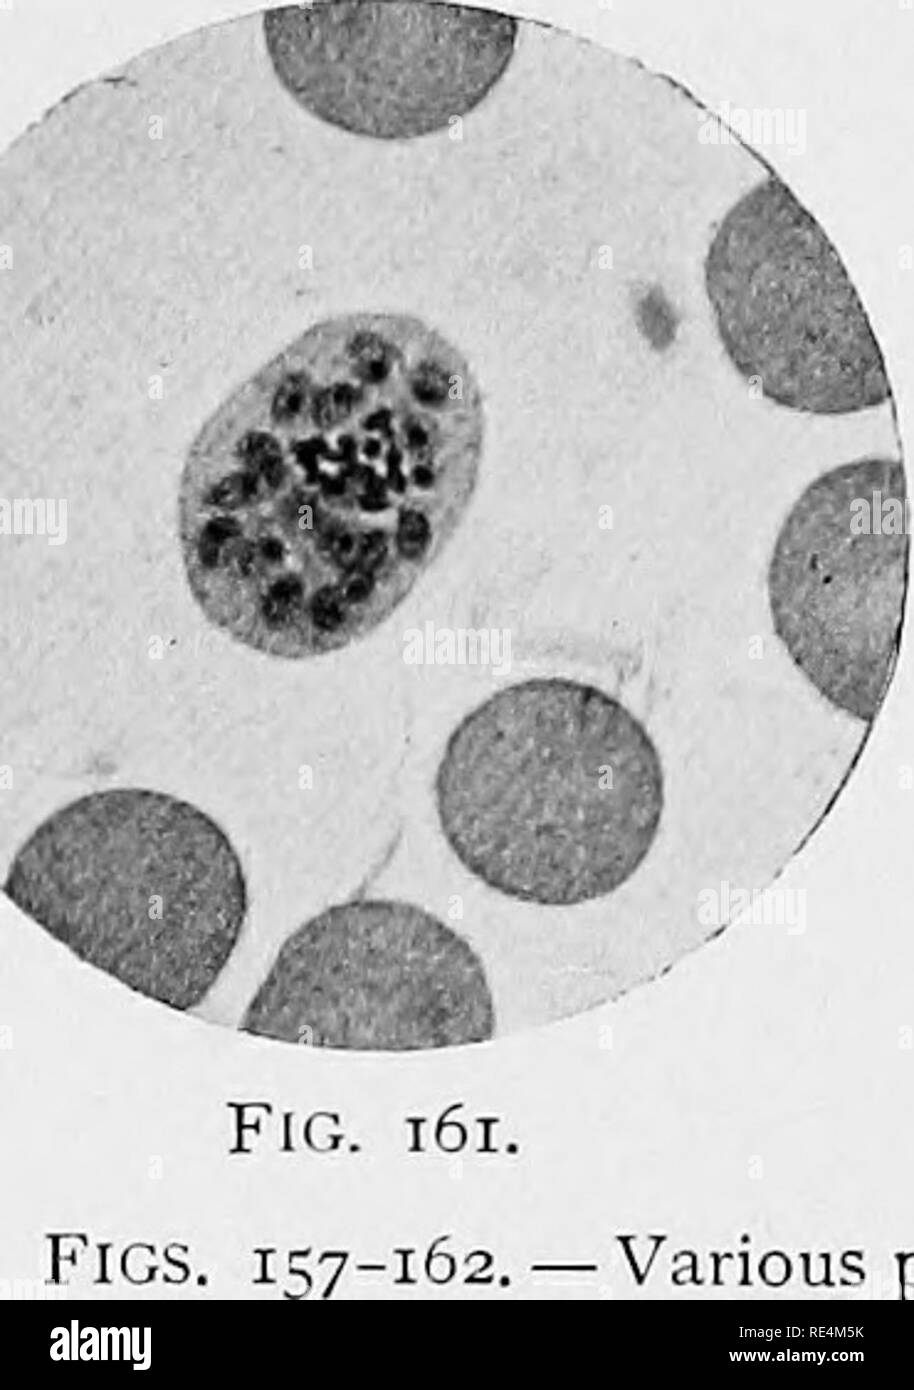 . Manual of bacteriology. Bacteriology.  i^' Fig. 158. / Fig. 159. Fig. 160.. *-• ••V •  ^. Fig. 162. -Various phases of the benign tertian parasite. Fig, 157. Several young ring-shaped amccbnlae within the red corpuscles, one of the latter en- larged and showing a dotted appearance. Fig. 158. A larger amosbula containing pigment granules. Fig. 159. Two large ama:bulas, exemplifying the great variation in form. Fig. 160. Large amcebulae assuming the spherical form andshowing isolated fragments of chromatin — preparatory to sporulation. Fig. 161. Sporocyte, which has produced eighteen spores, Stock Photo